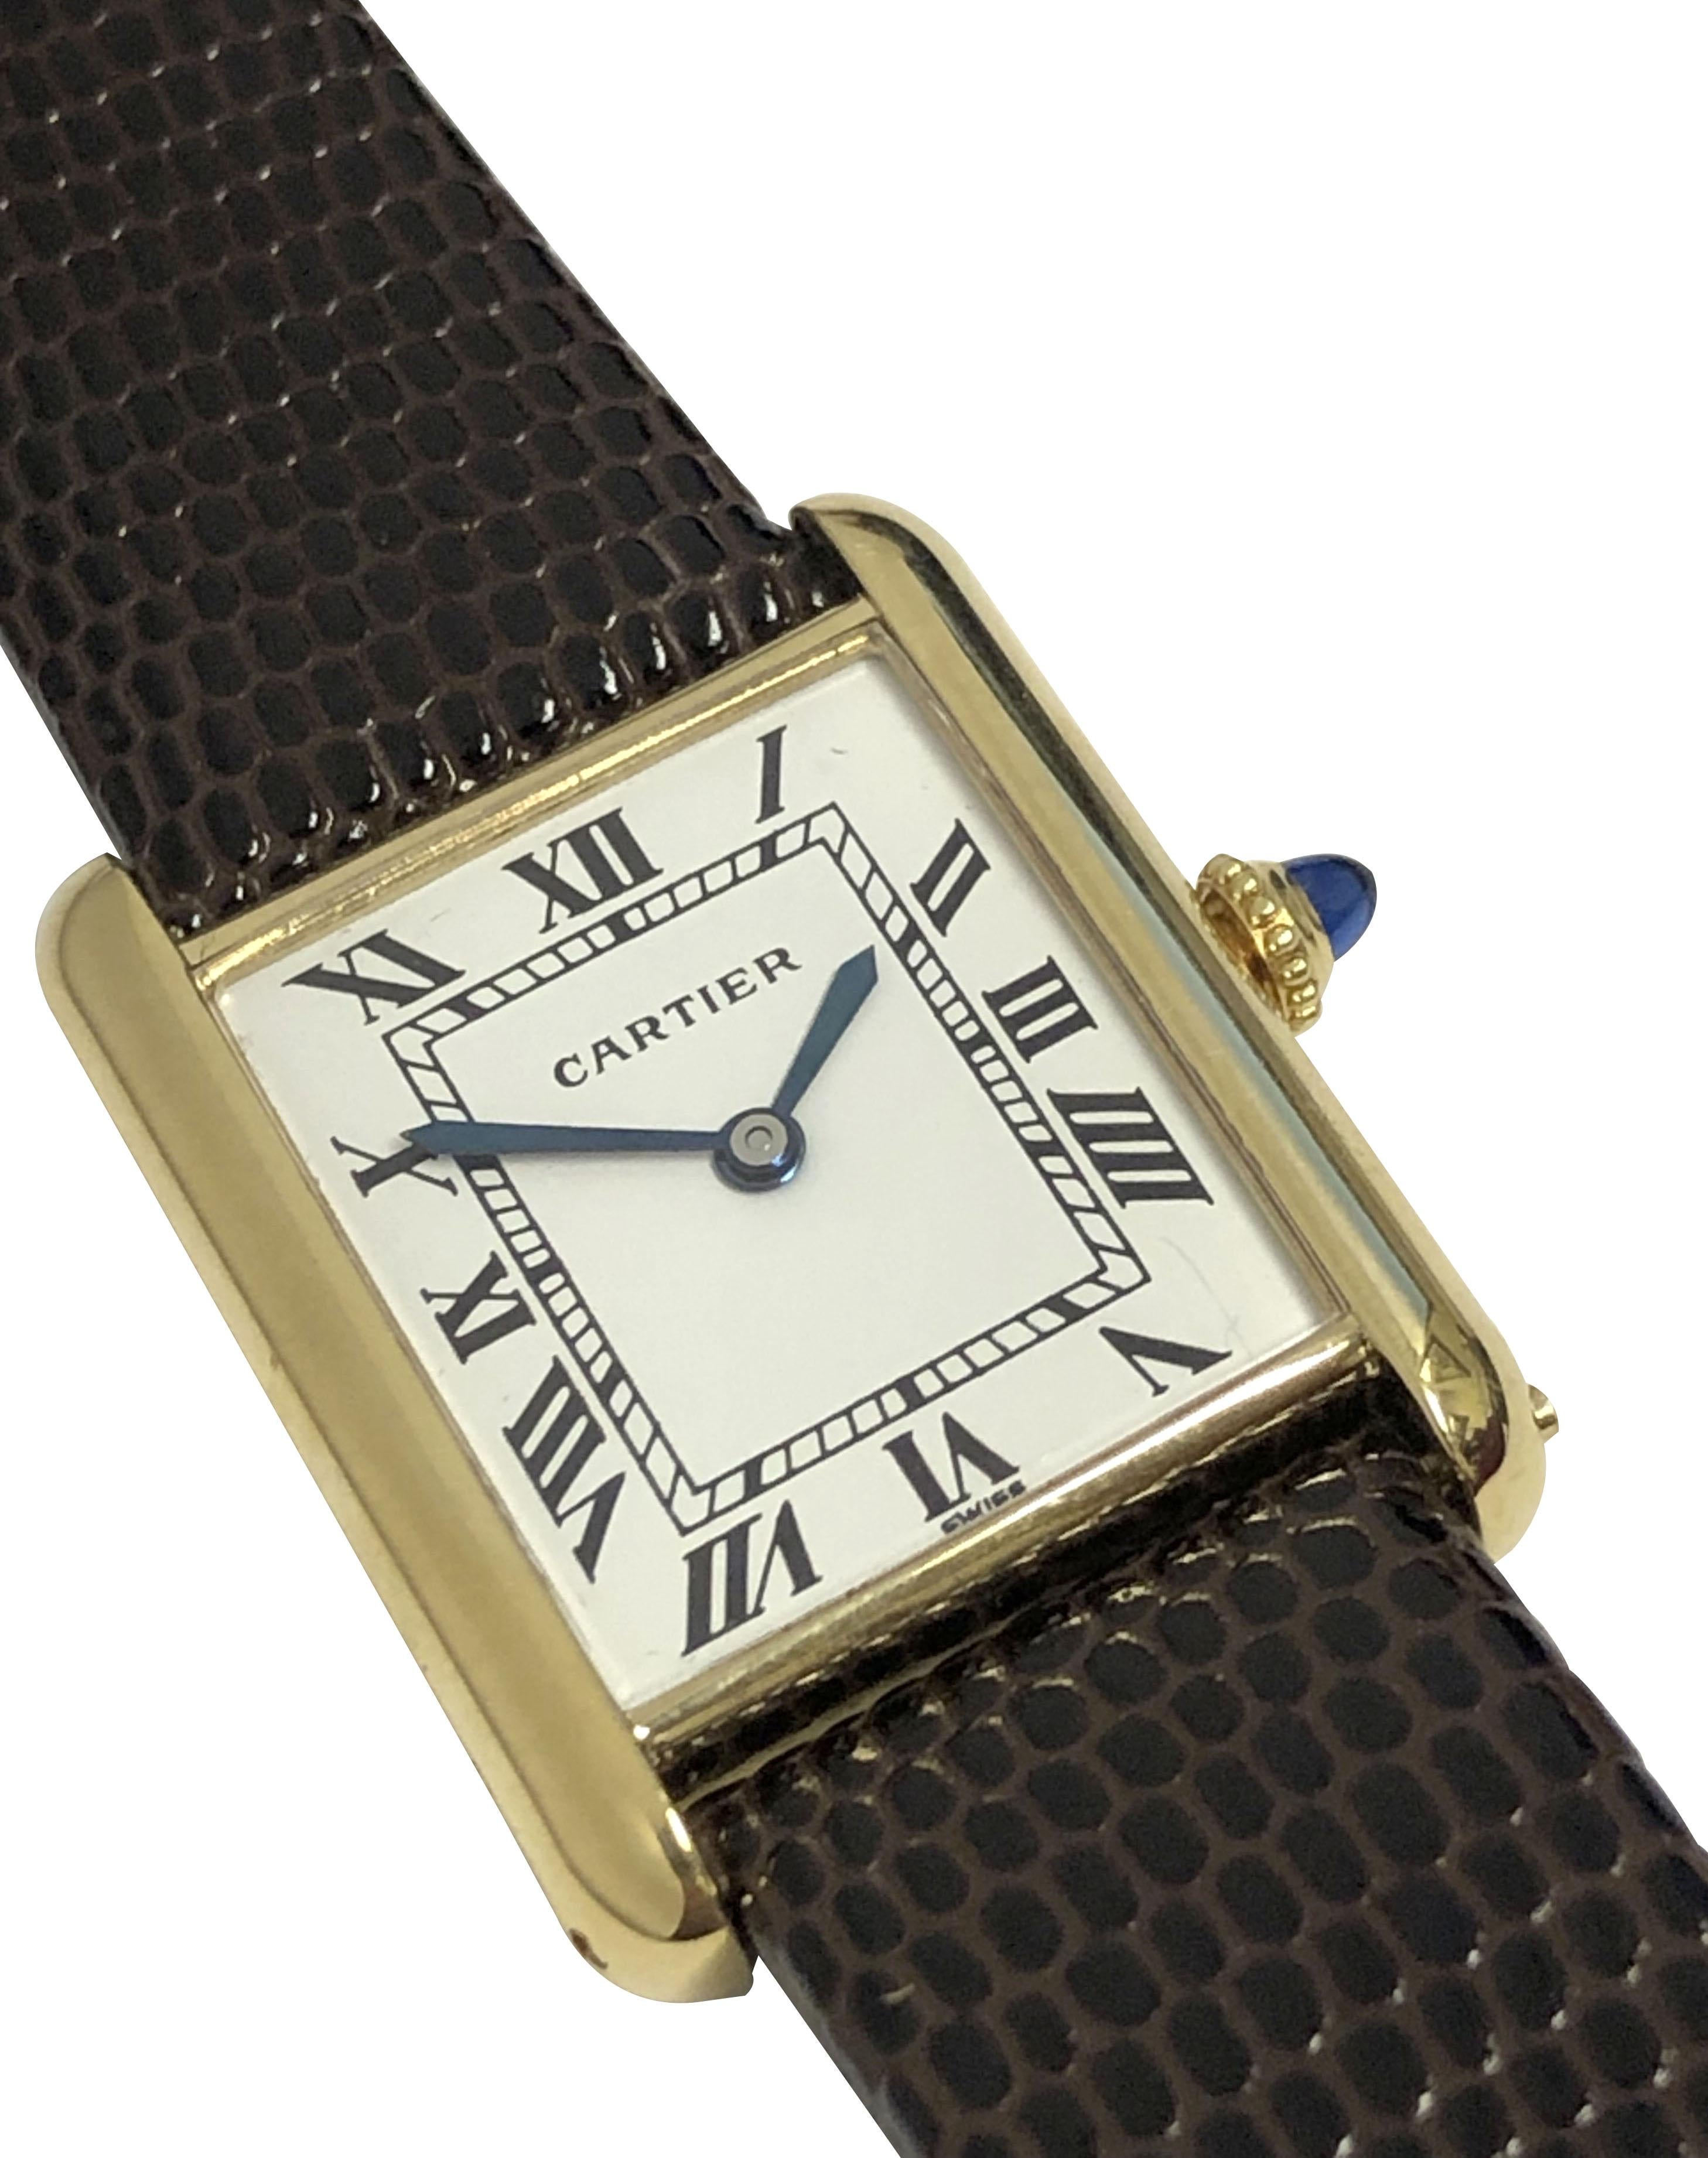 Circa 1970s Cartier Classic Tank Wrist Watch, 23 X 22 M.M 18k Yellow Gold 2 Piece case, 17 Jewel, Mechanical, Manual wind Nickle Lever movement, White Dial with Black Roman Numerals, Sapphire Crown and Glass Crystal. New Brown Lizard Grain Strap